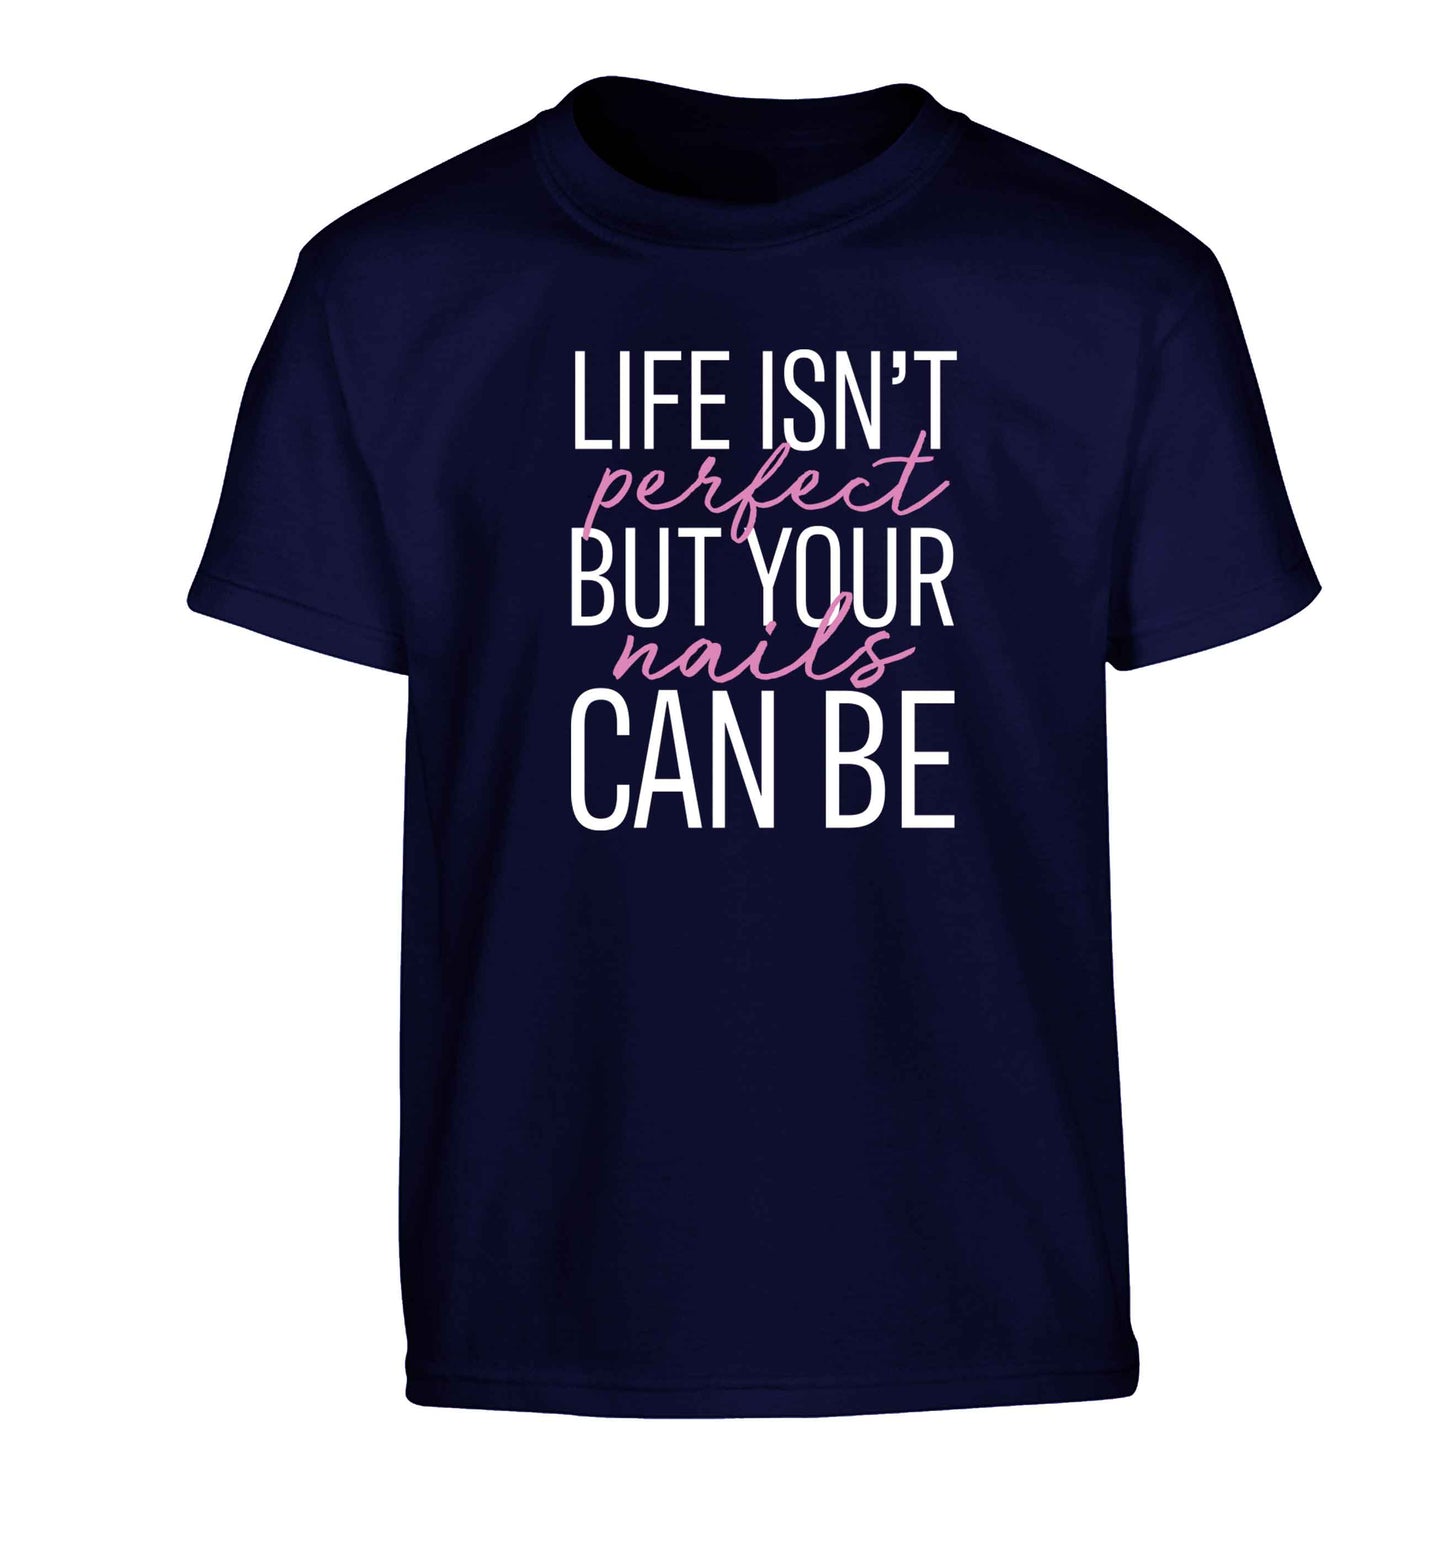 Life isn't perfect but your nails can be Children's navy Tshirt 12-13 Years